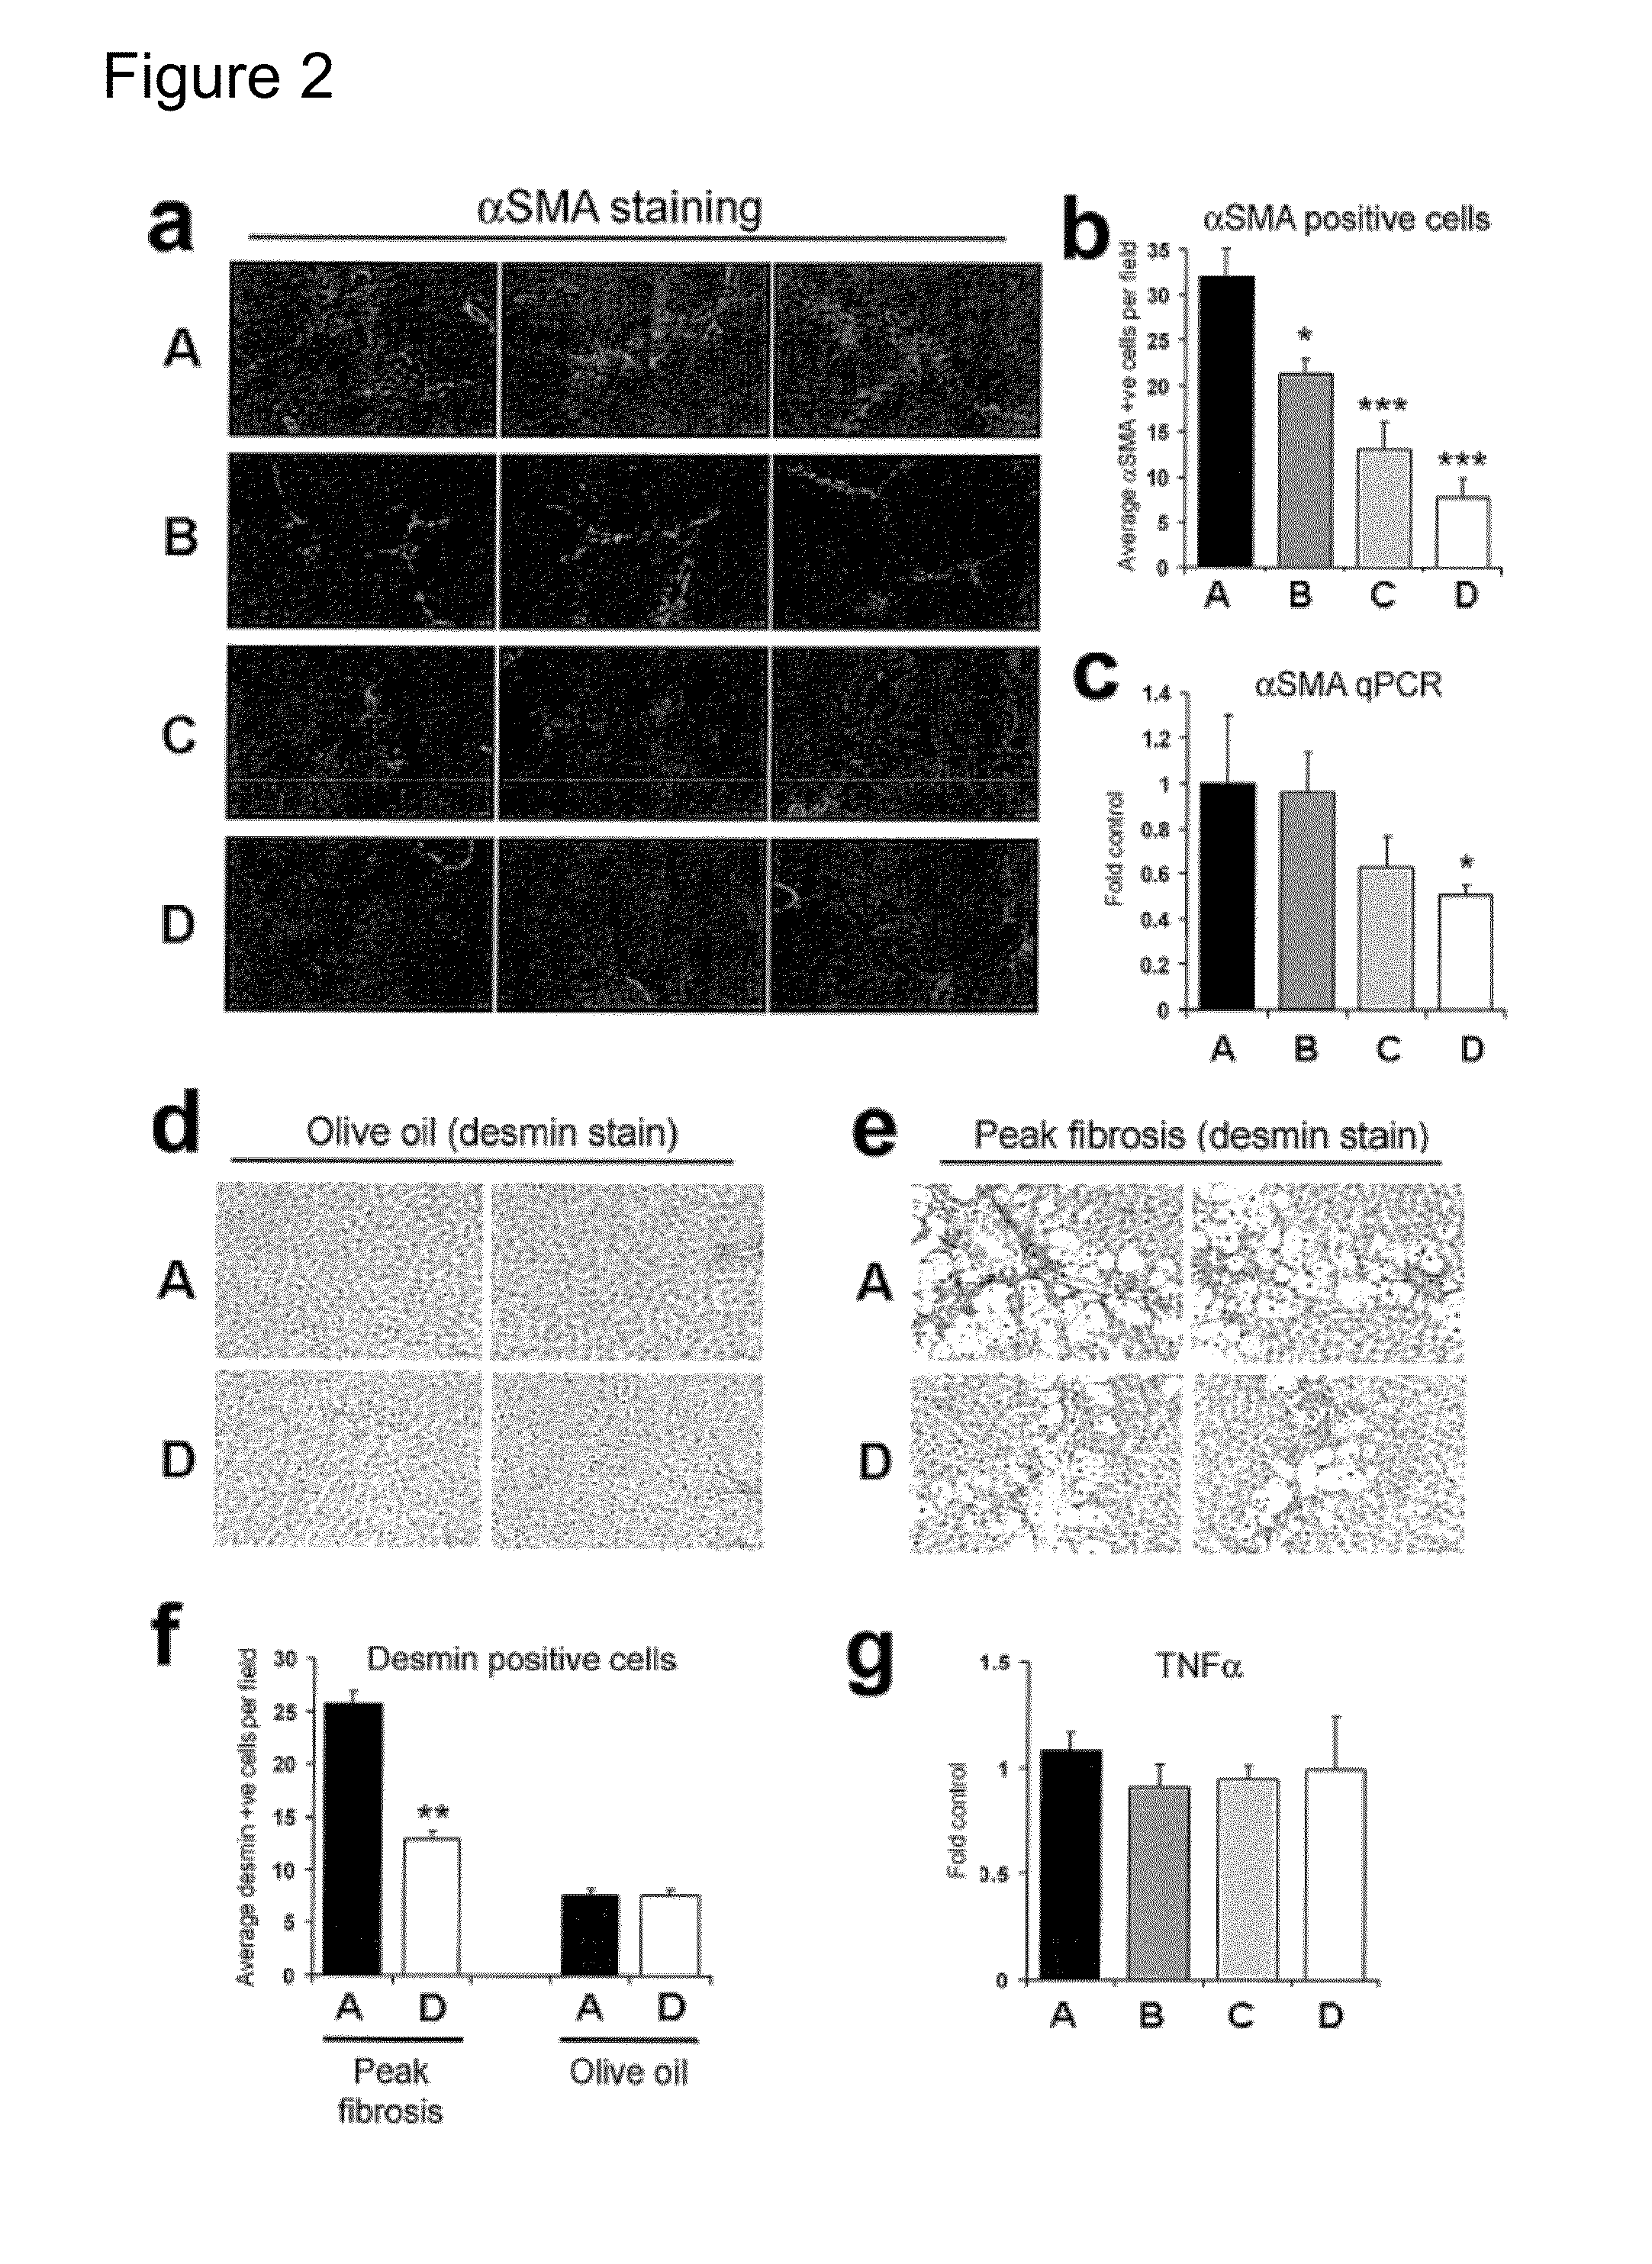 Methods relating to identification of susceptibility to liver injury